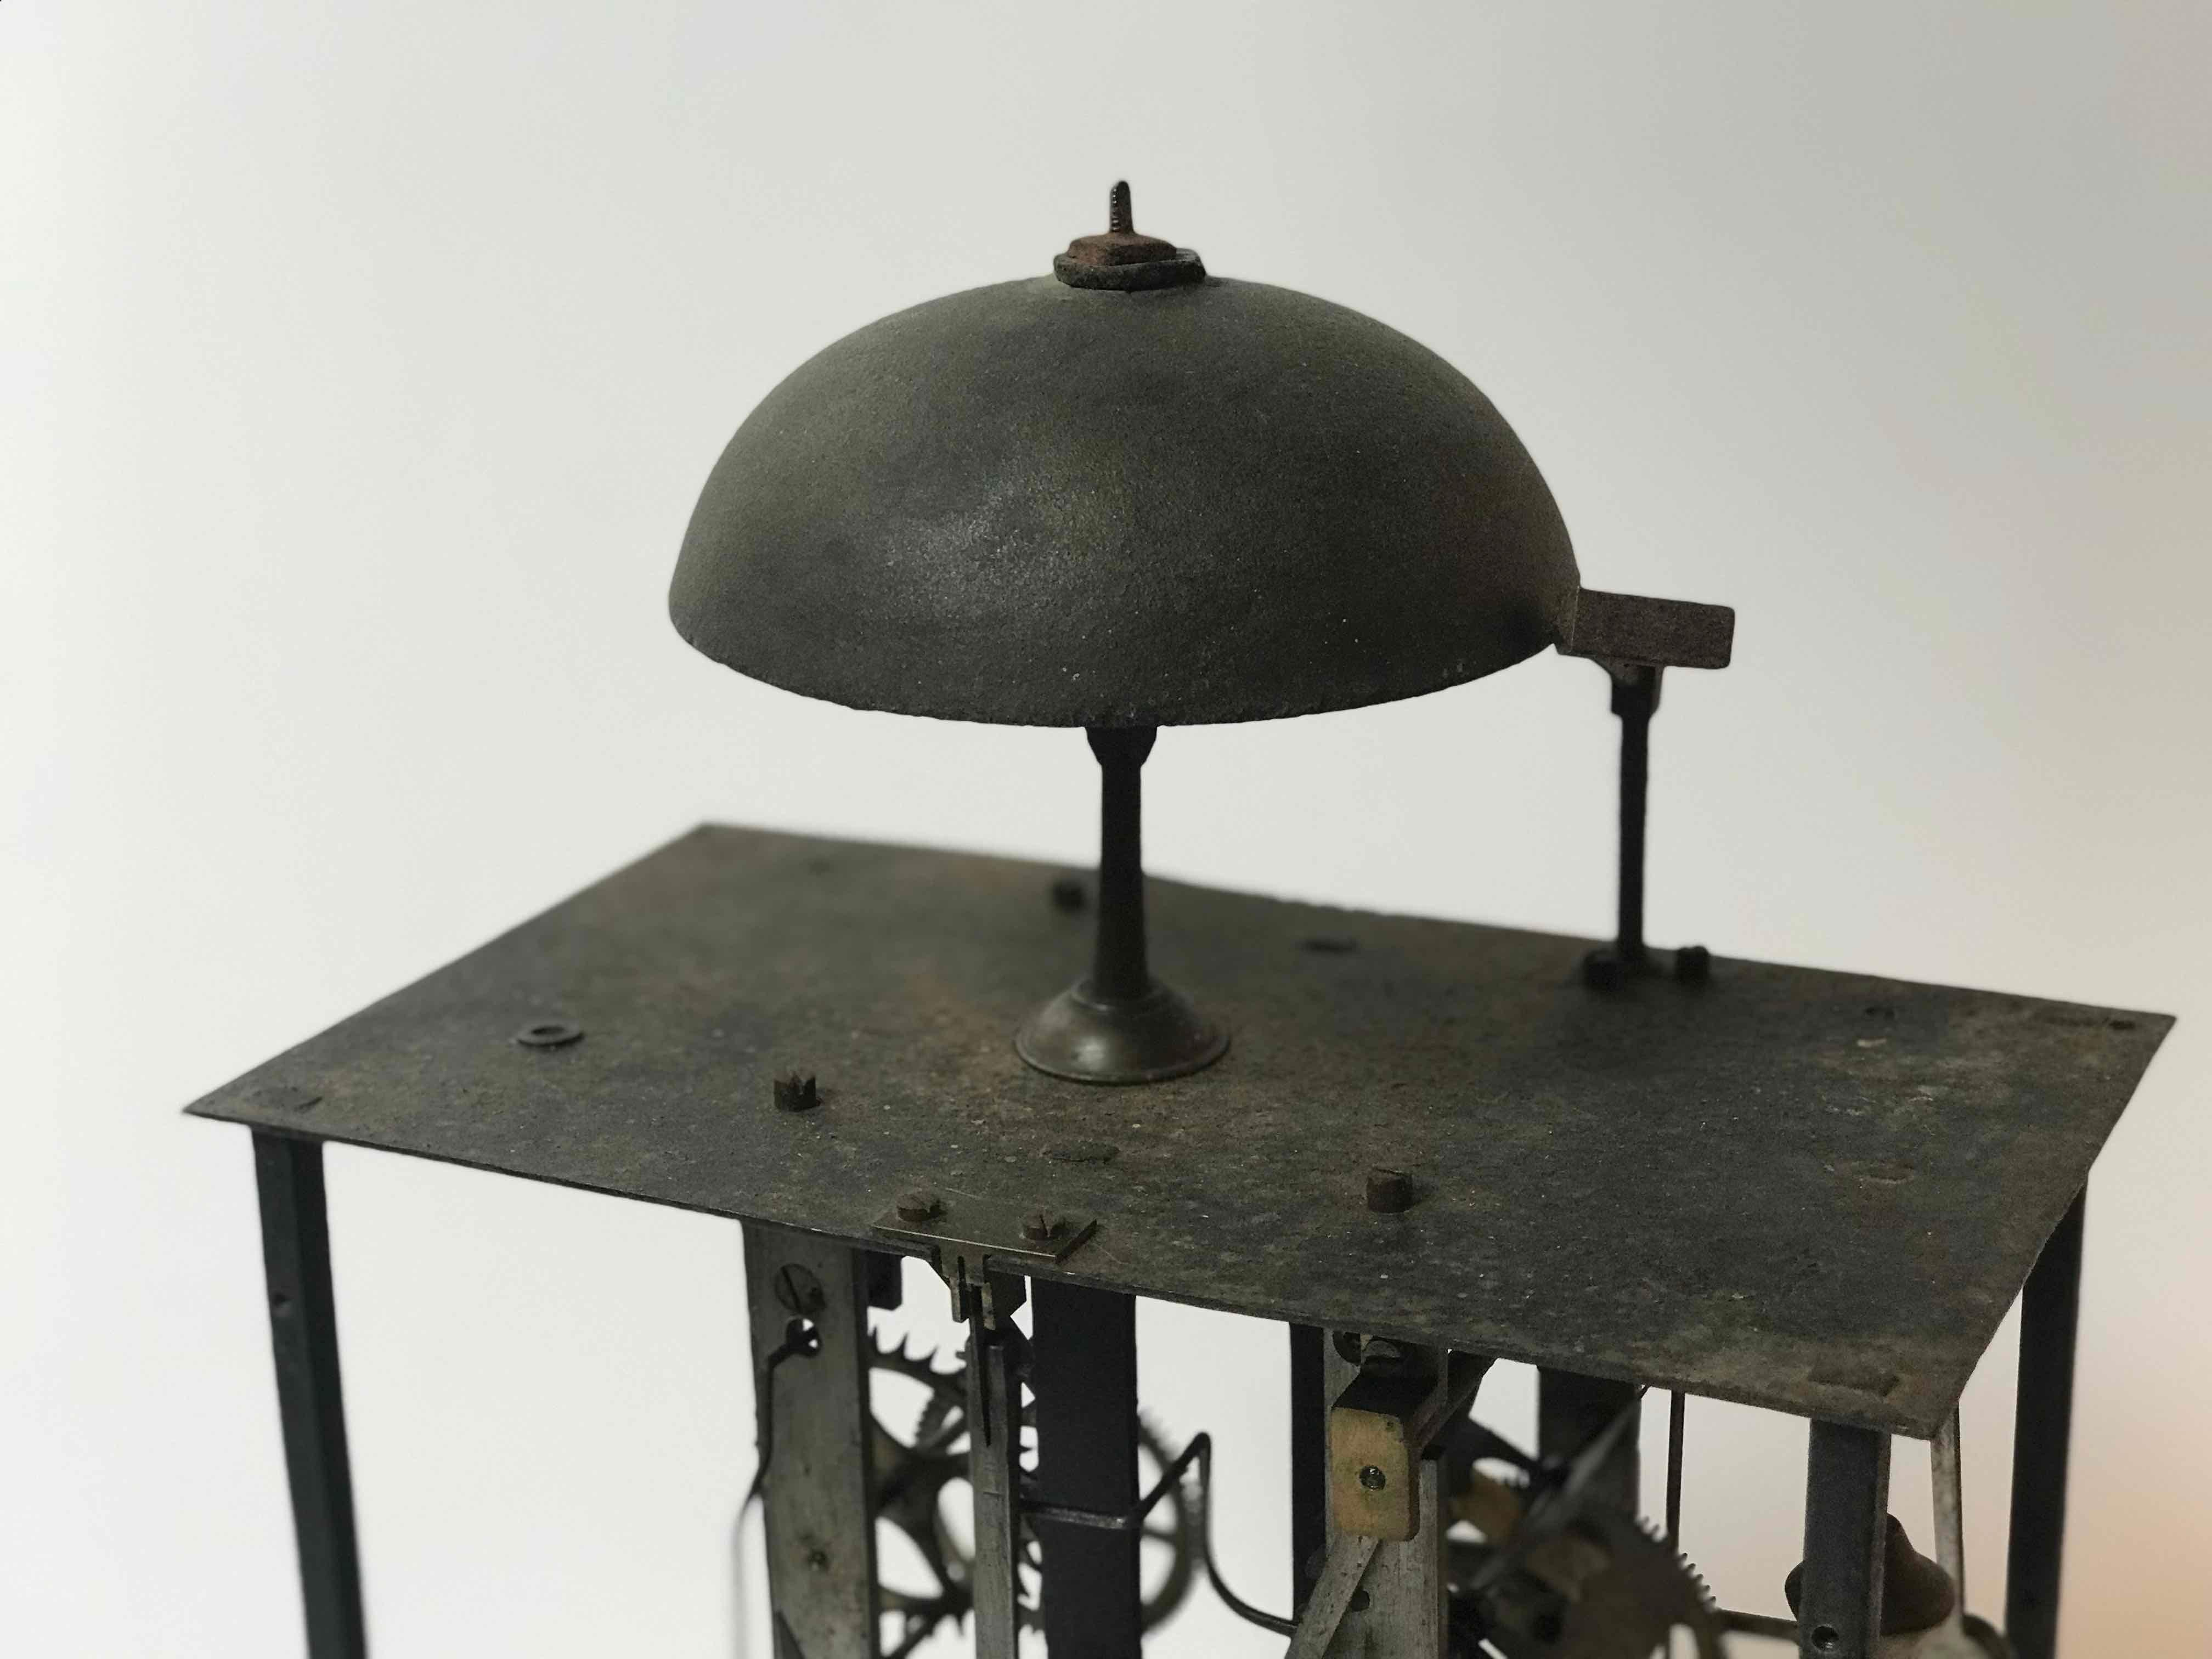 Clock Works from 19th Century Long Case Clock Mounted on Stand as Sculpture (Industriell)